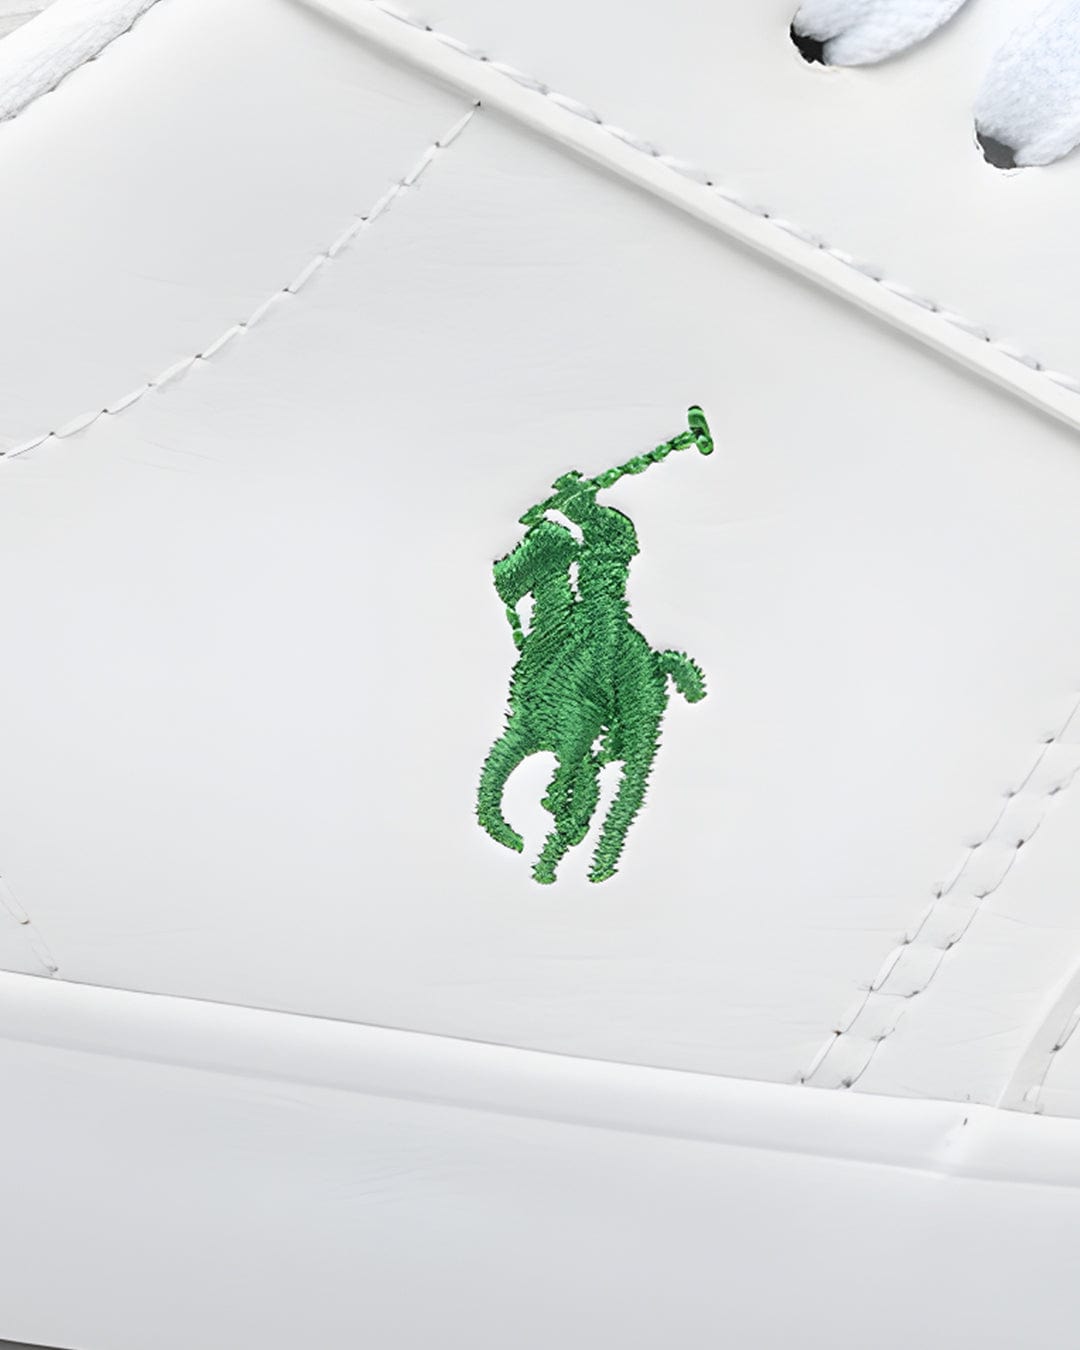 Polo Ralph Lauren Shoes Boys Polo Ralph Lauren White And Green Sneakers